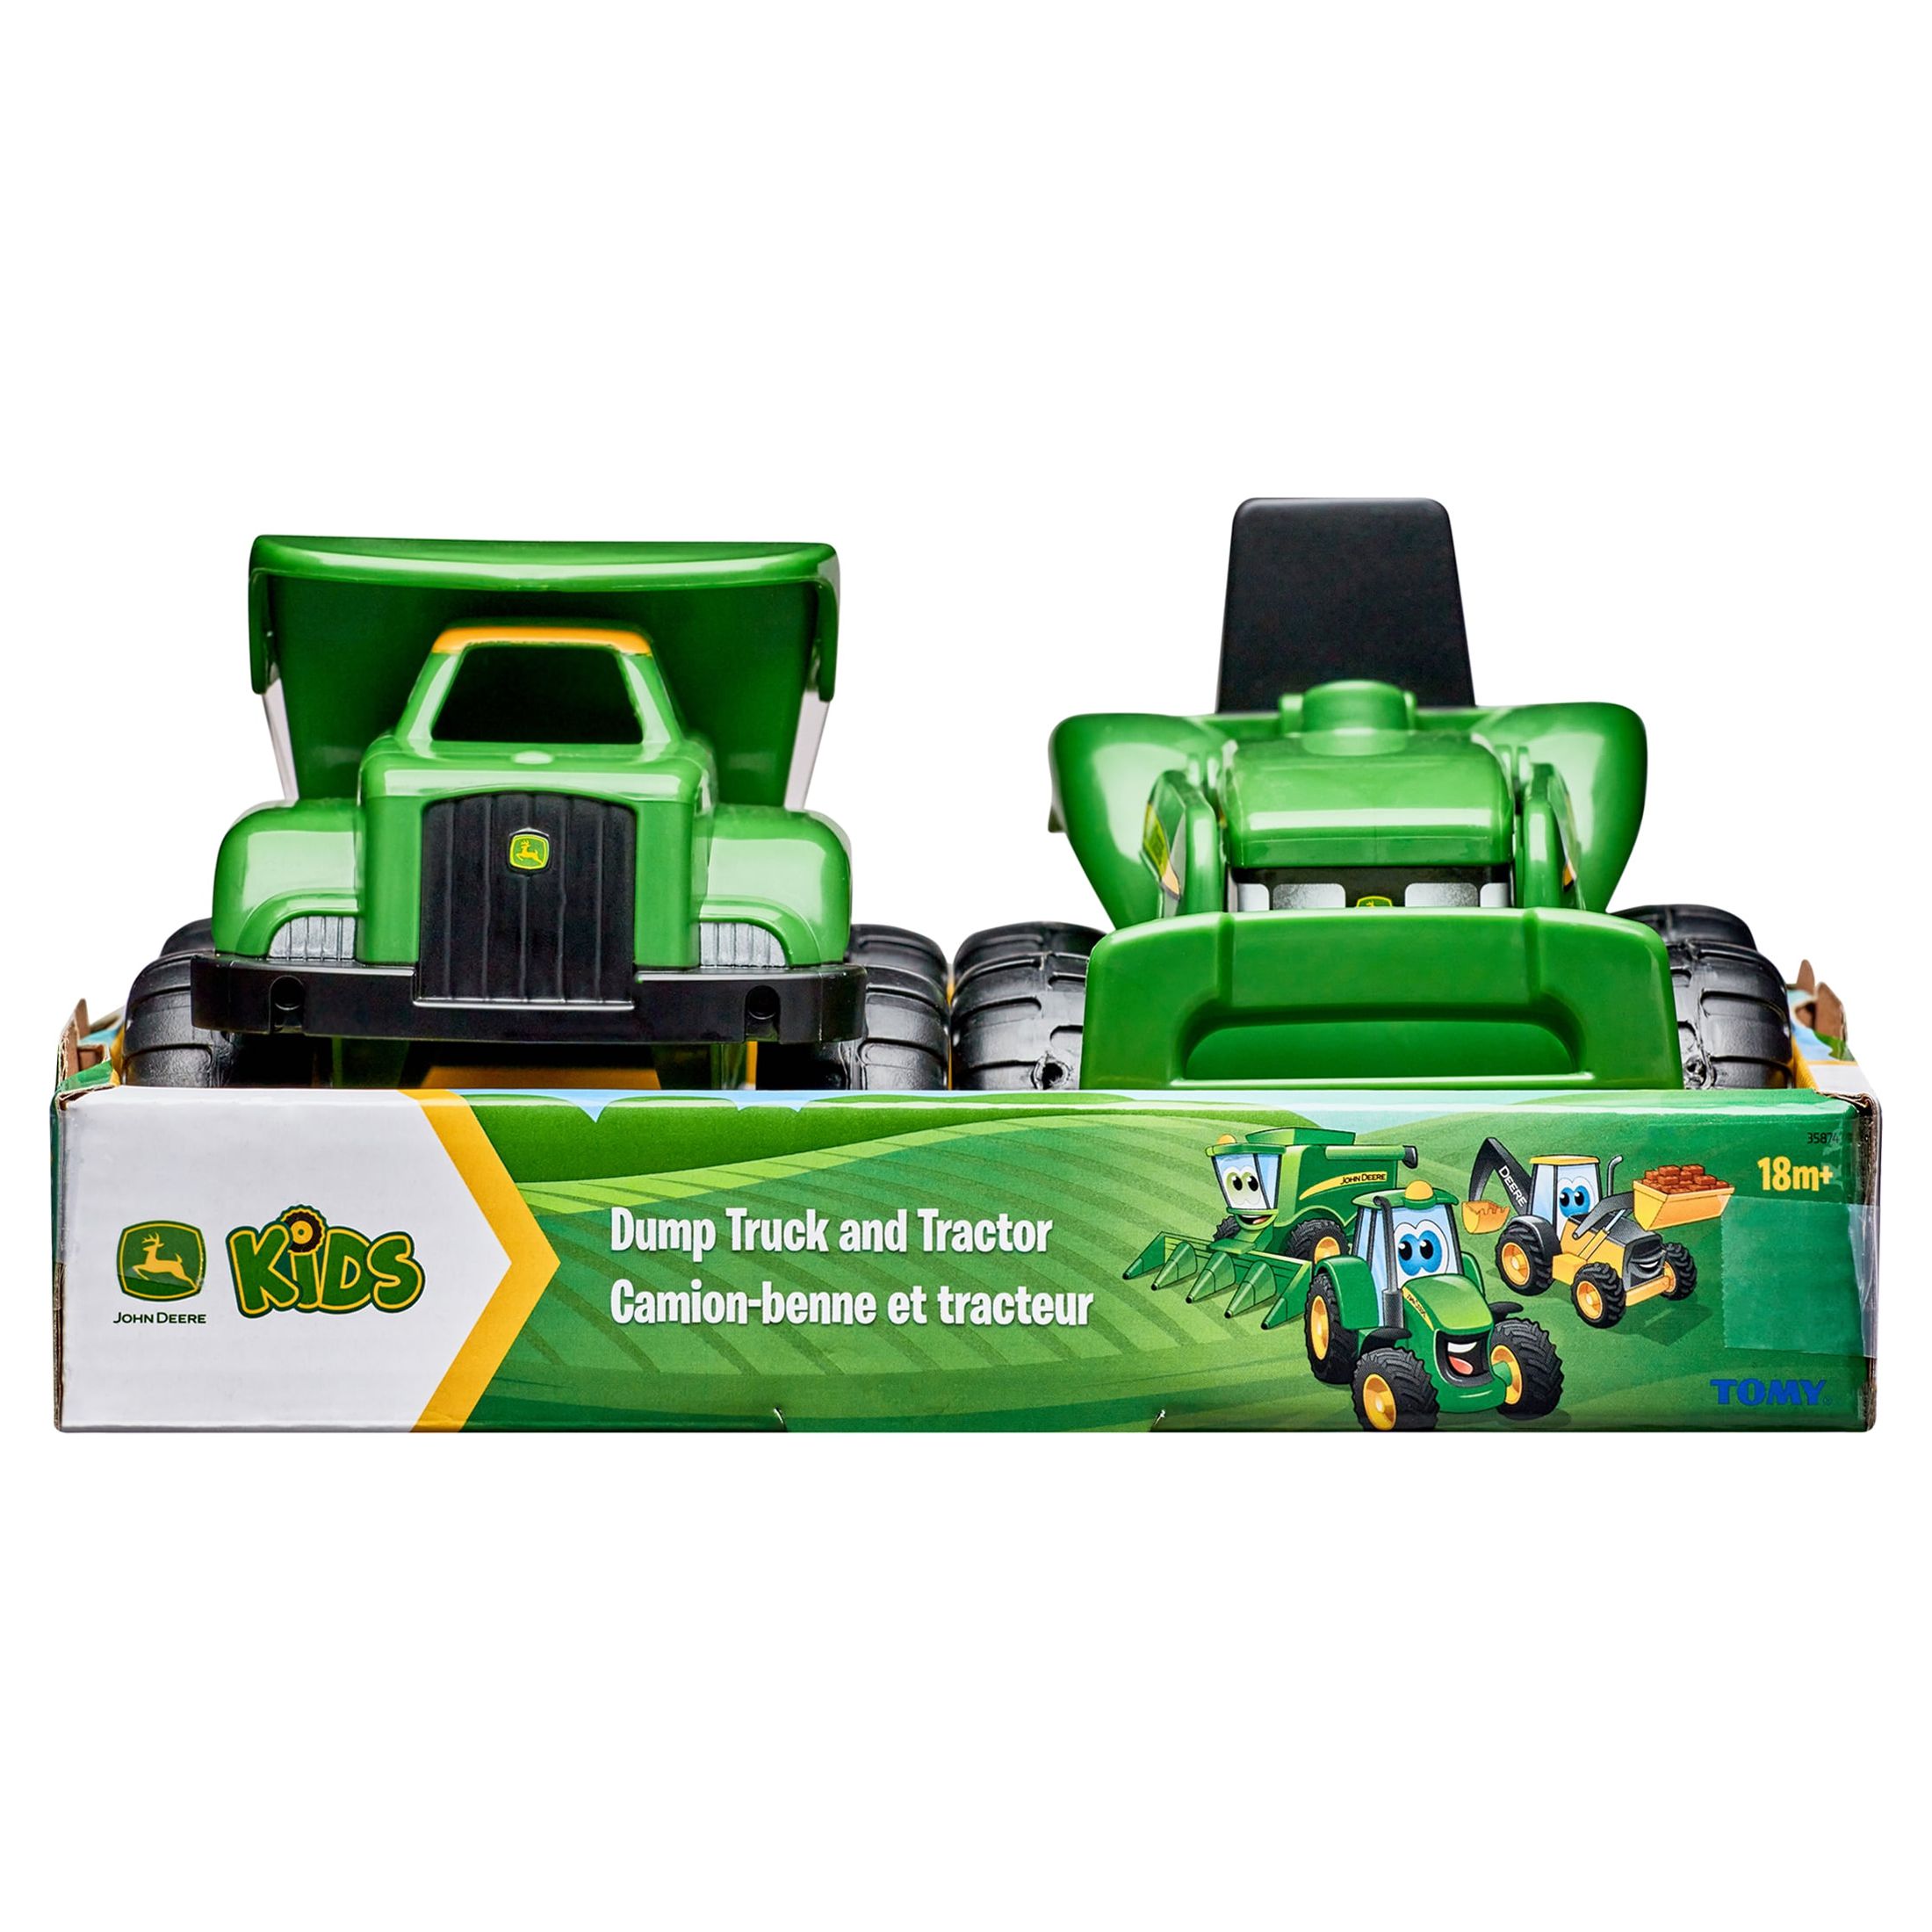 John Deere 6" Sandbox Toy Vehicle Set, Dump Truck and Tractor Toy Vehicles, 2 Pack, Green - image 2 of 13